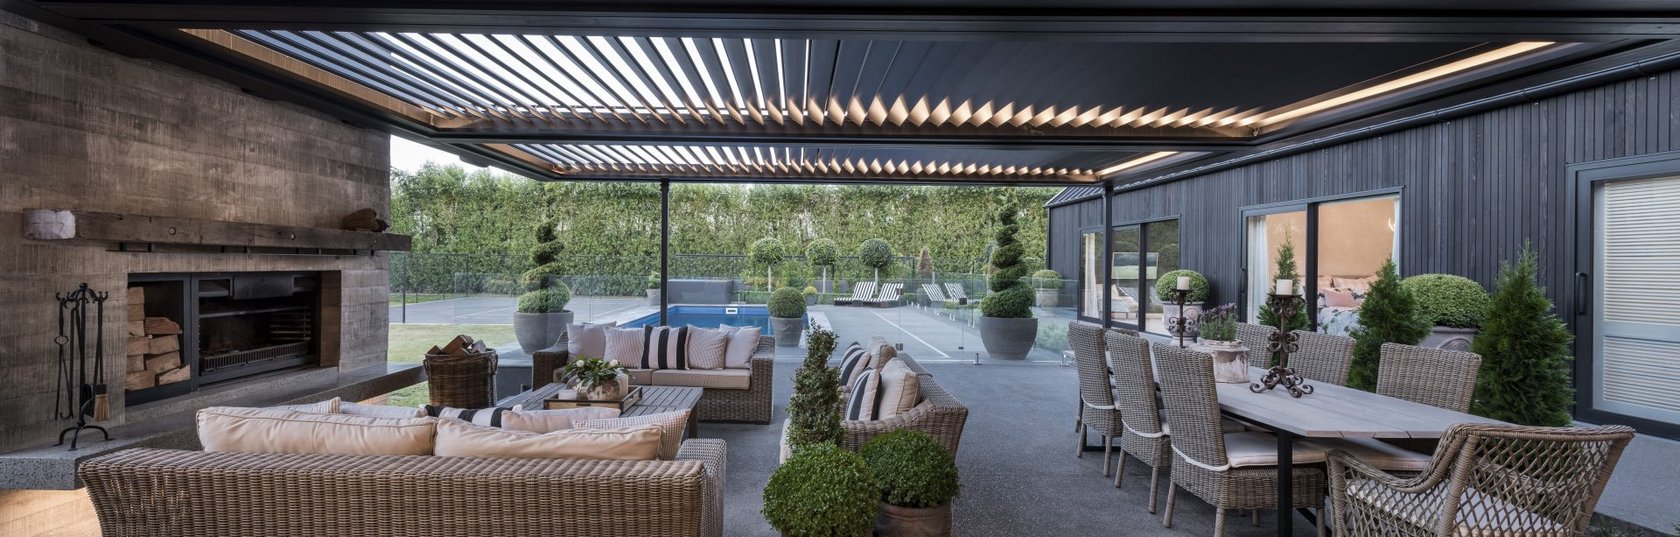 Expert advice to create the best outdoor living spaces